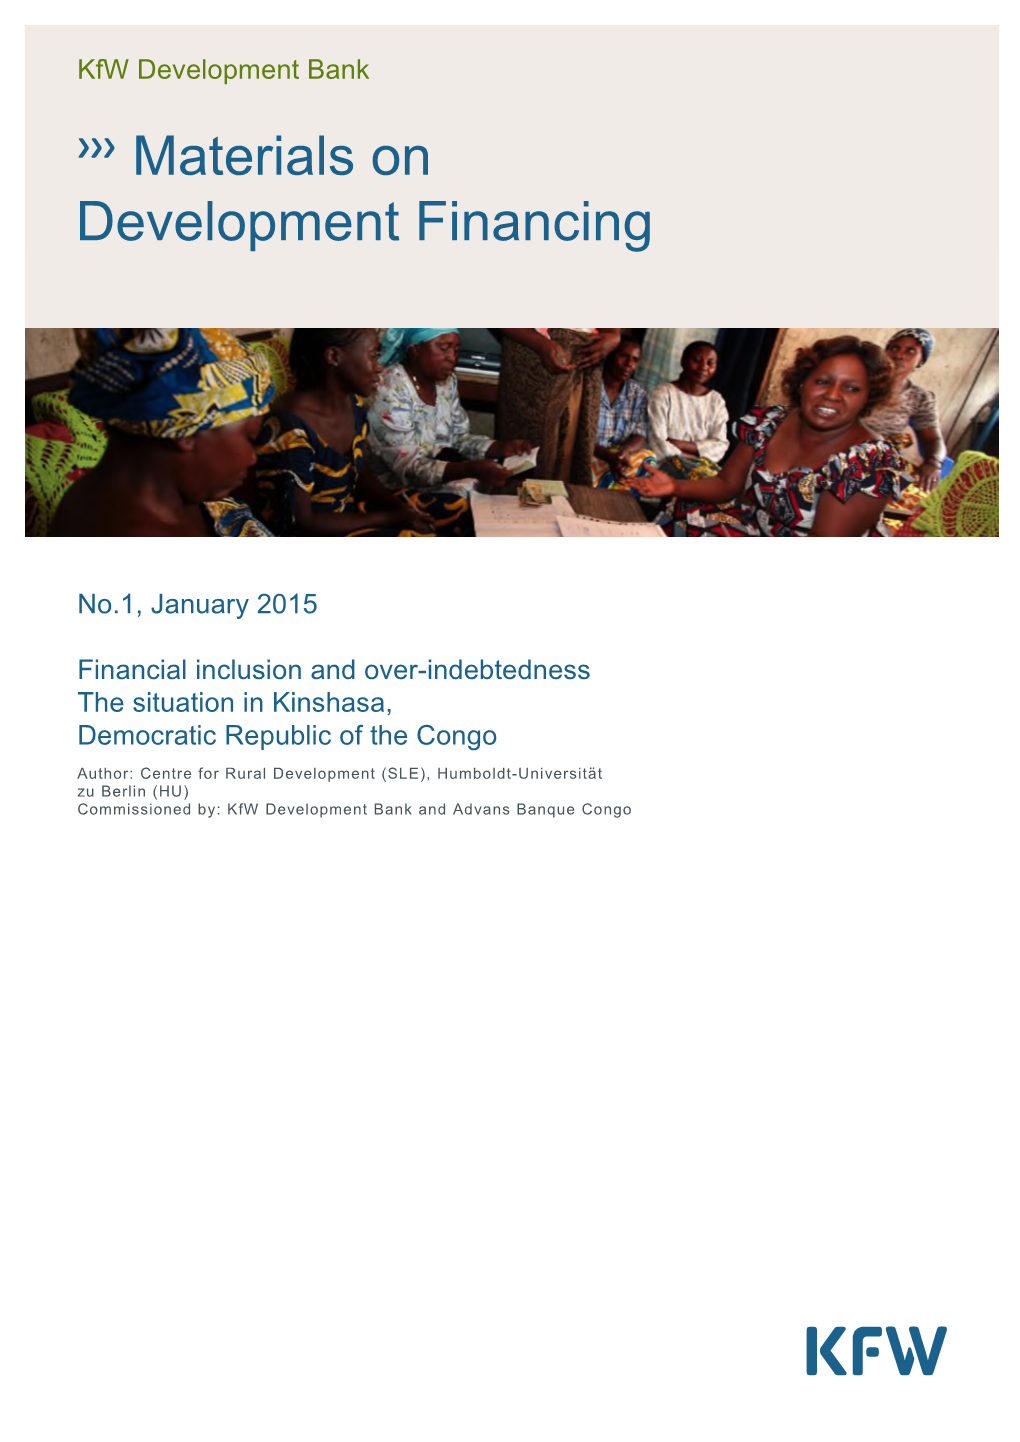 Financial Inclusion and Over-Indebtedness the Situation in Kinshasa, Democratic Republic of the Congo